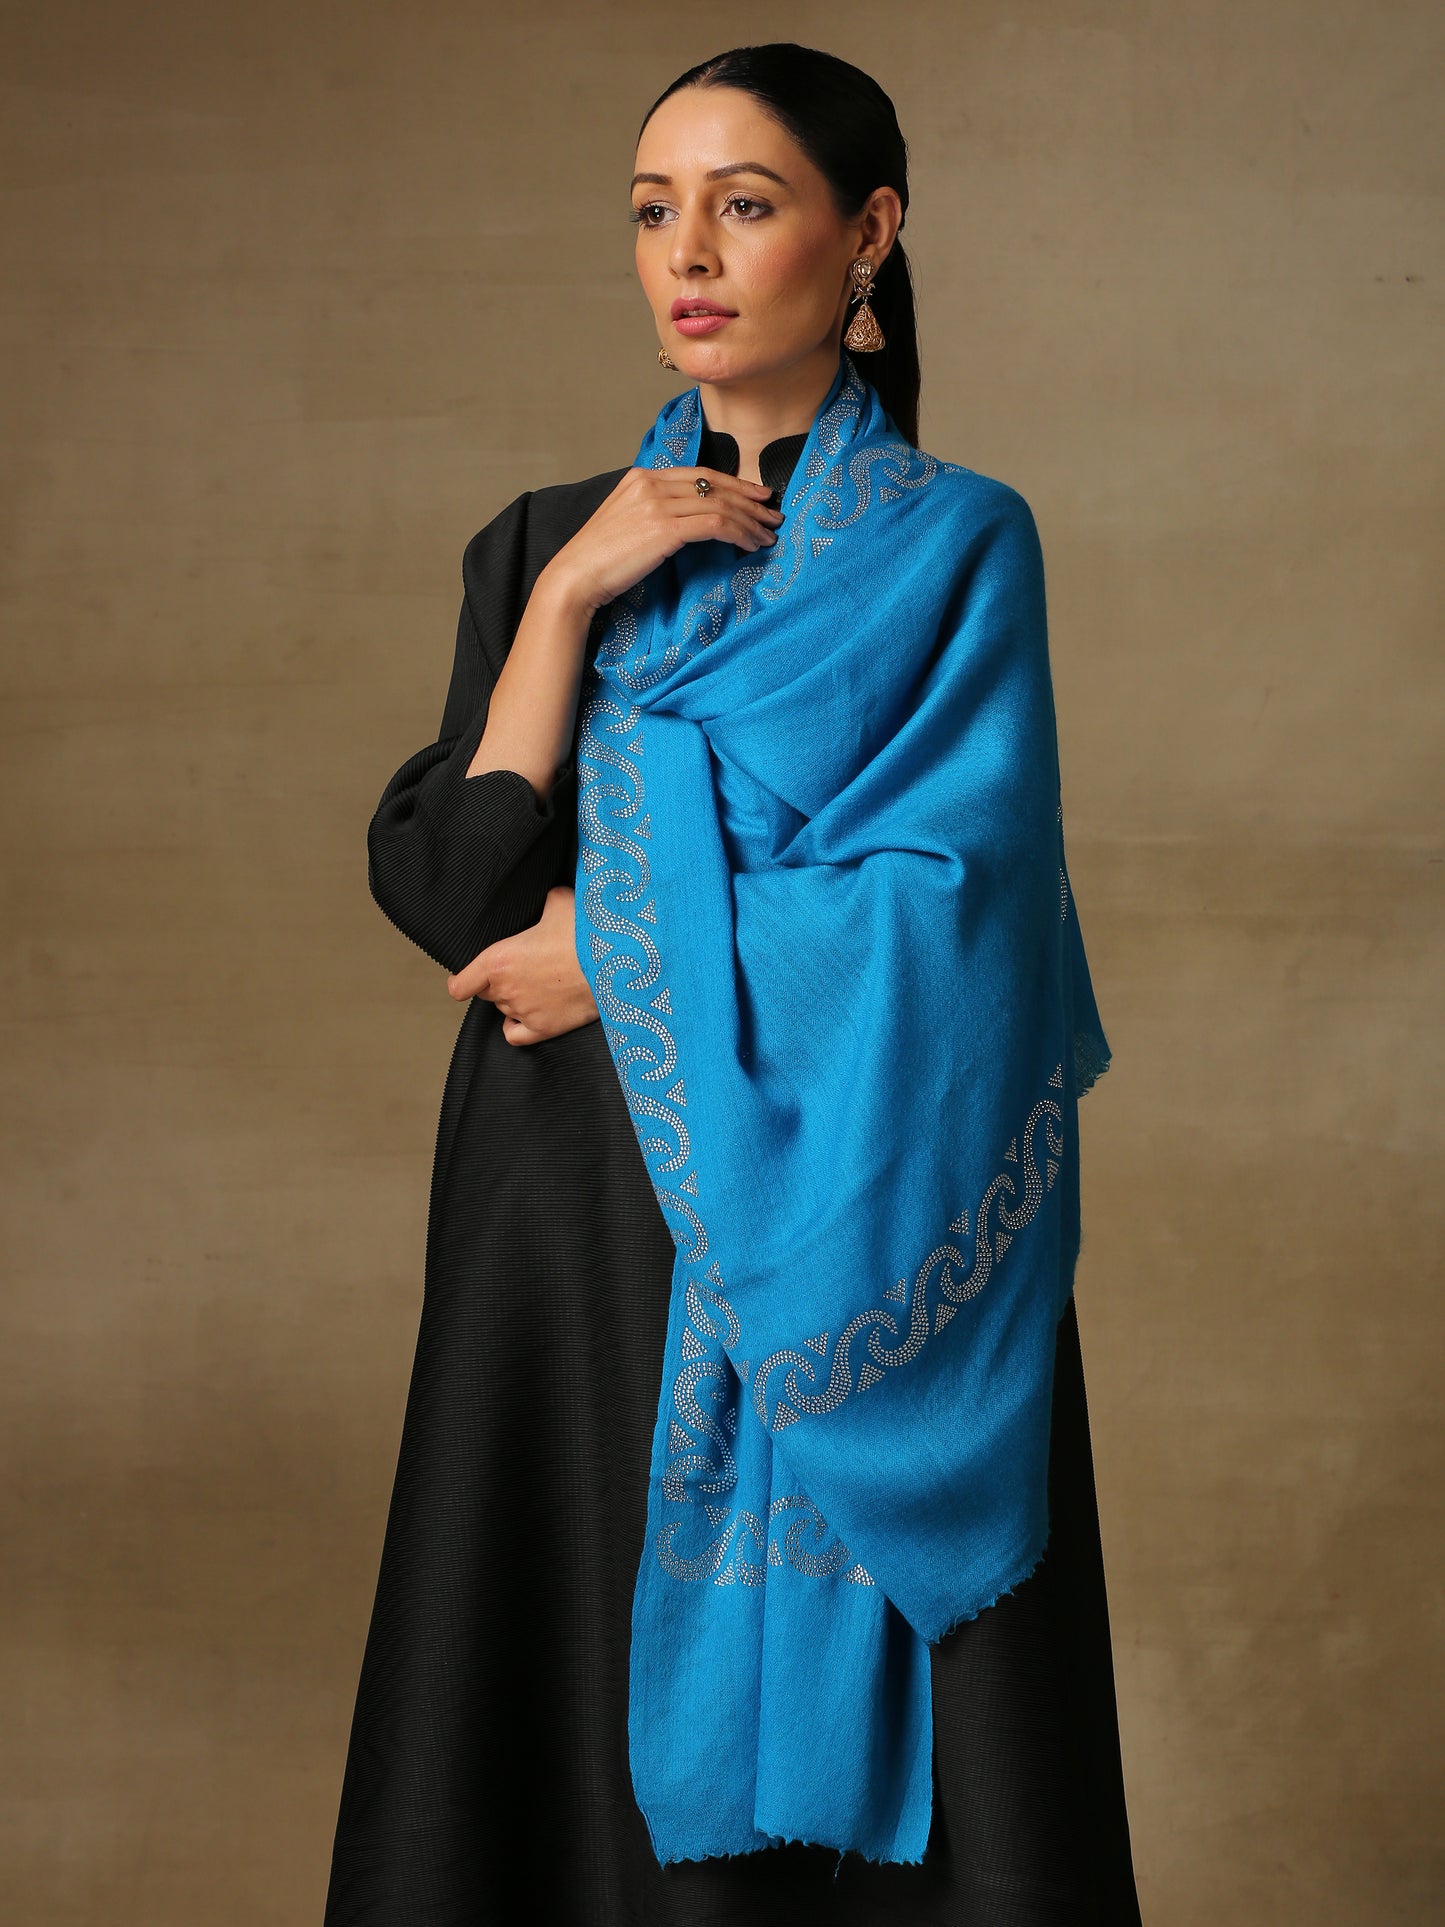 Model is wearing a firozi blue stole from the Era of Zaywar Border Swarovski Stole collection, hand embellished with fine silver swarovski in a waves design